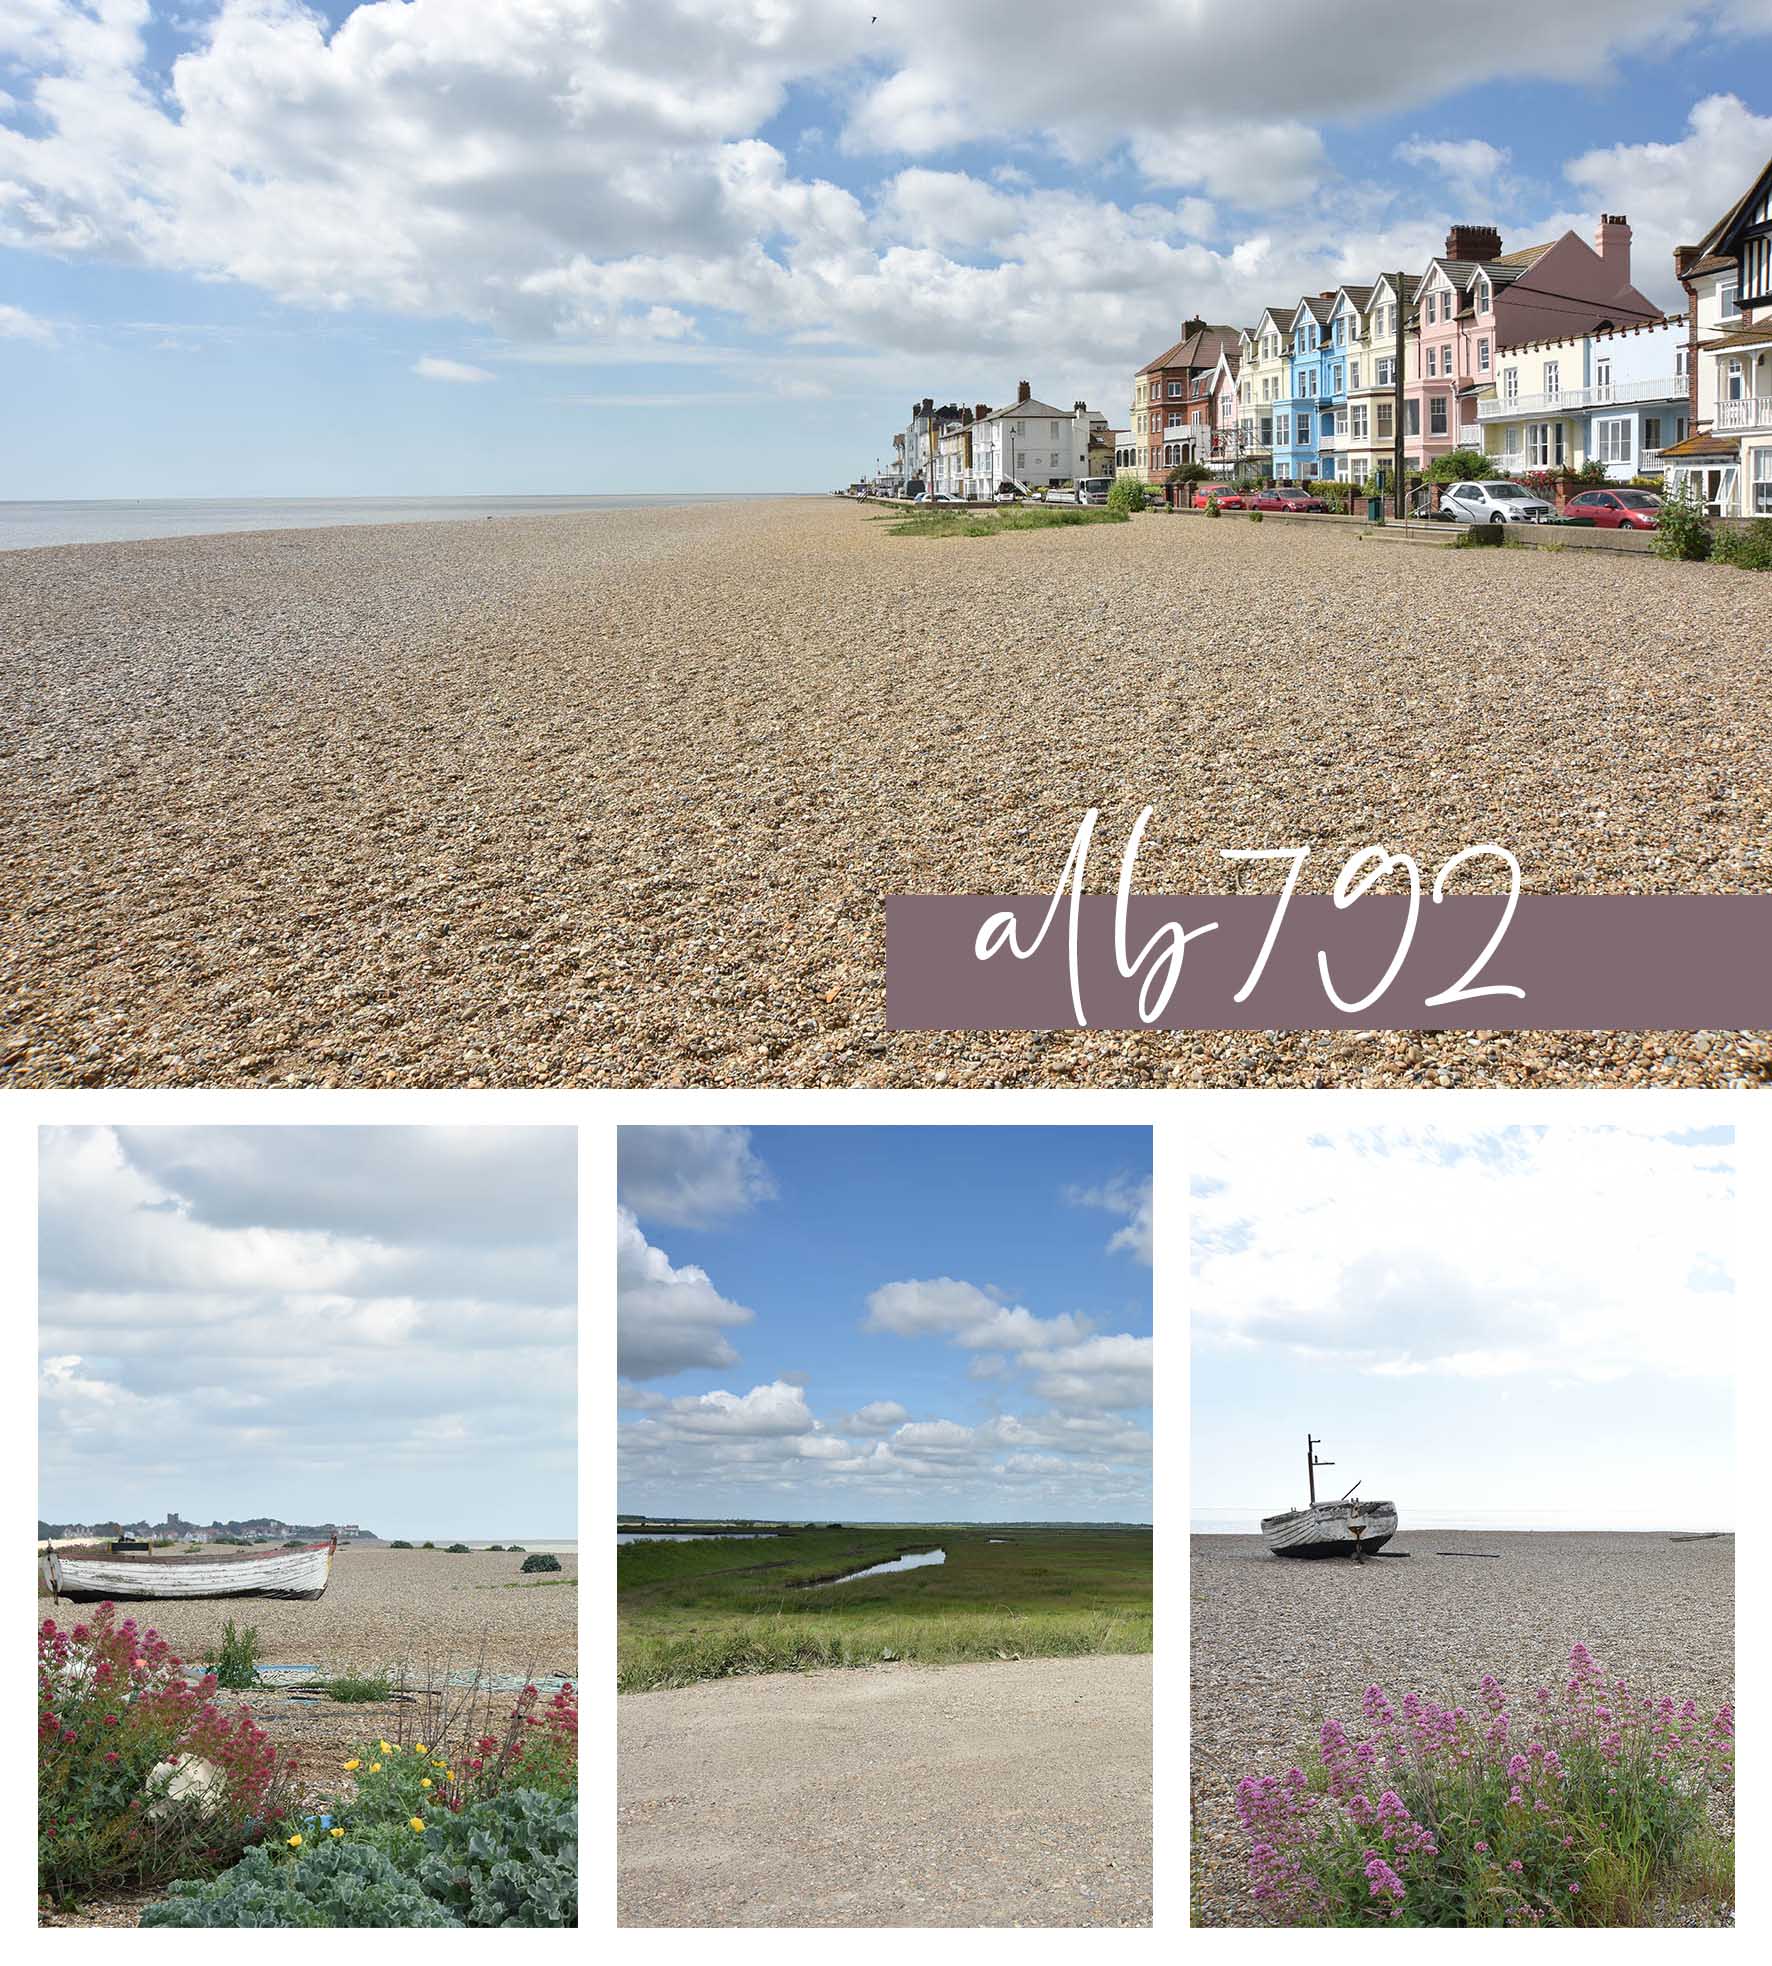 A collection of images from our beautiful ALB792 coastal location which features a unique Victorian beachfront art house & watch tower.